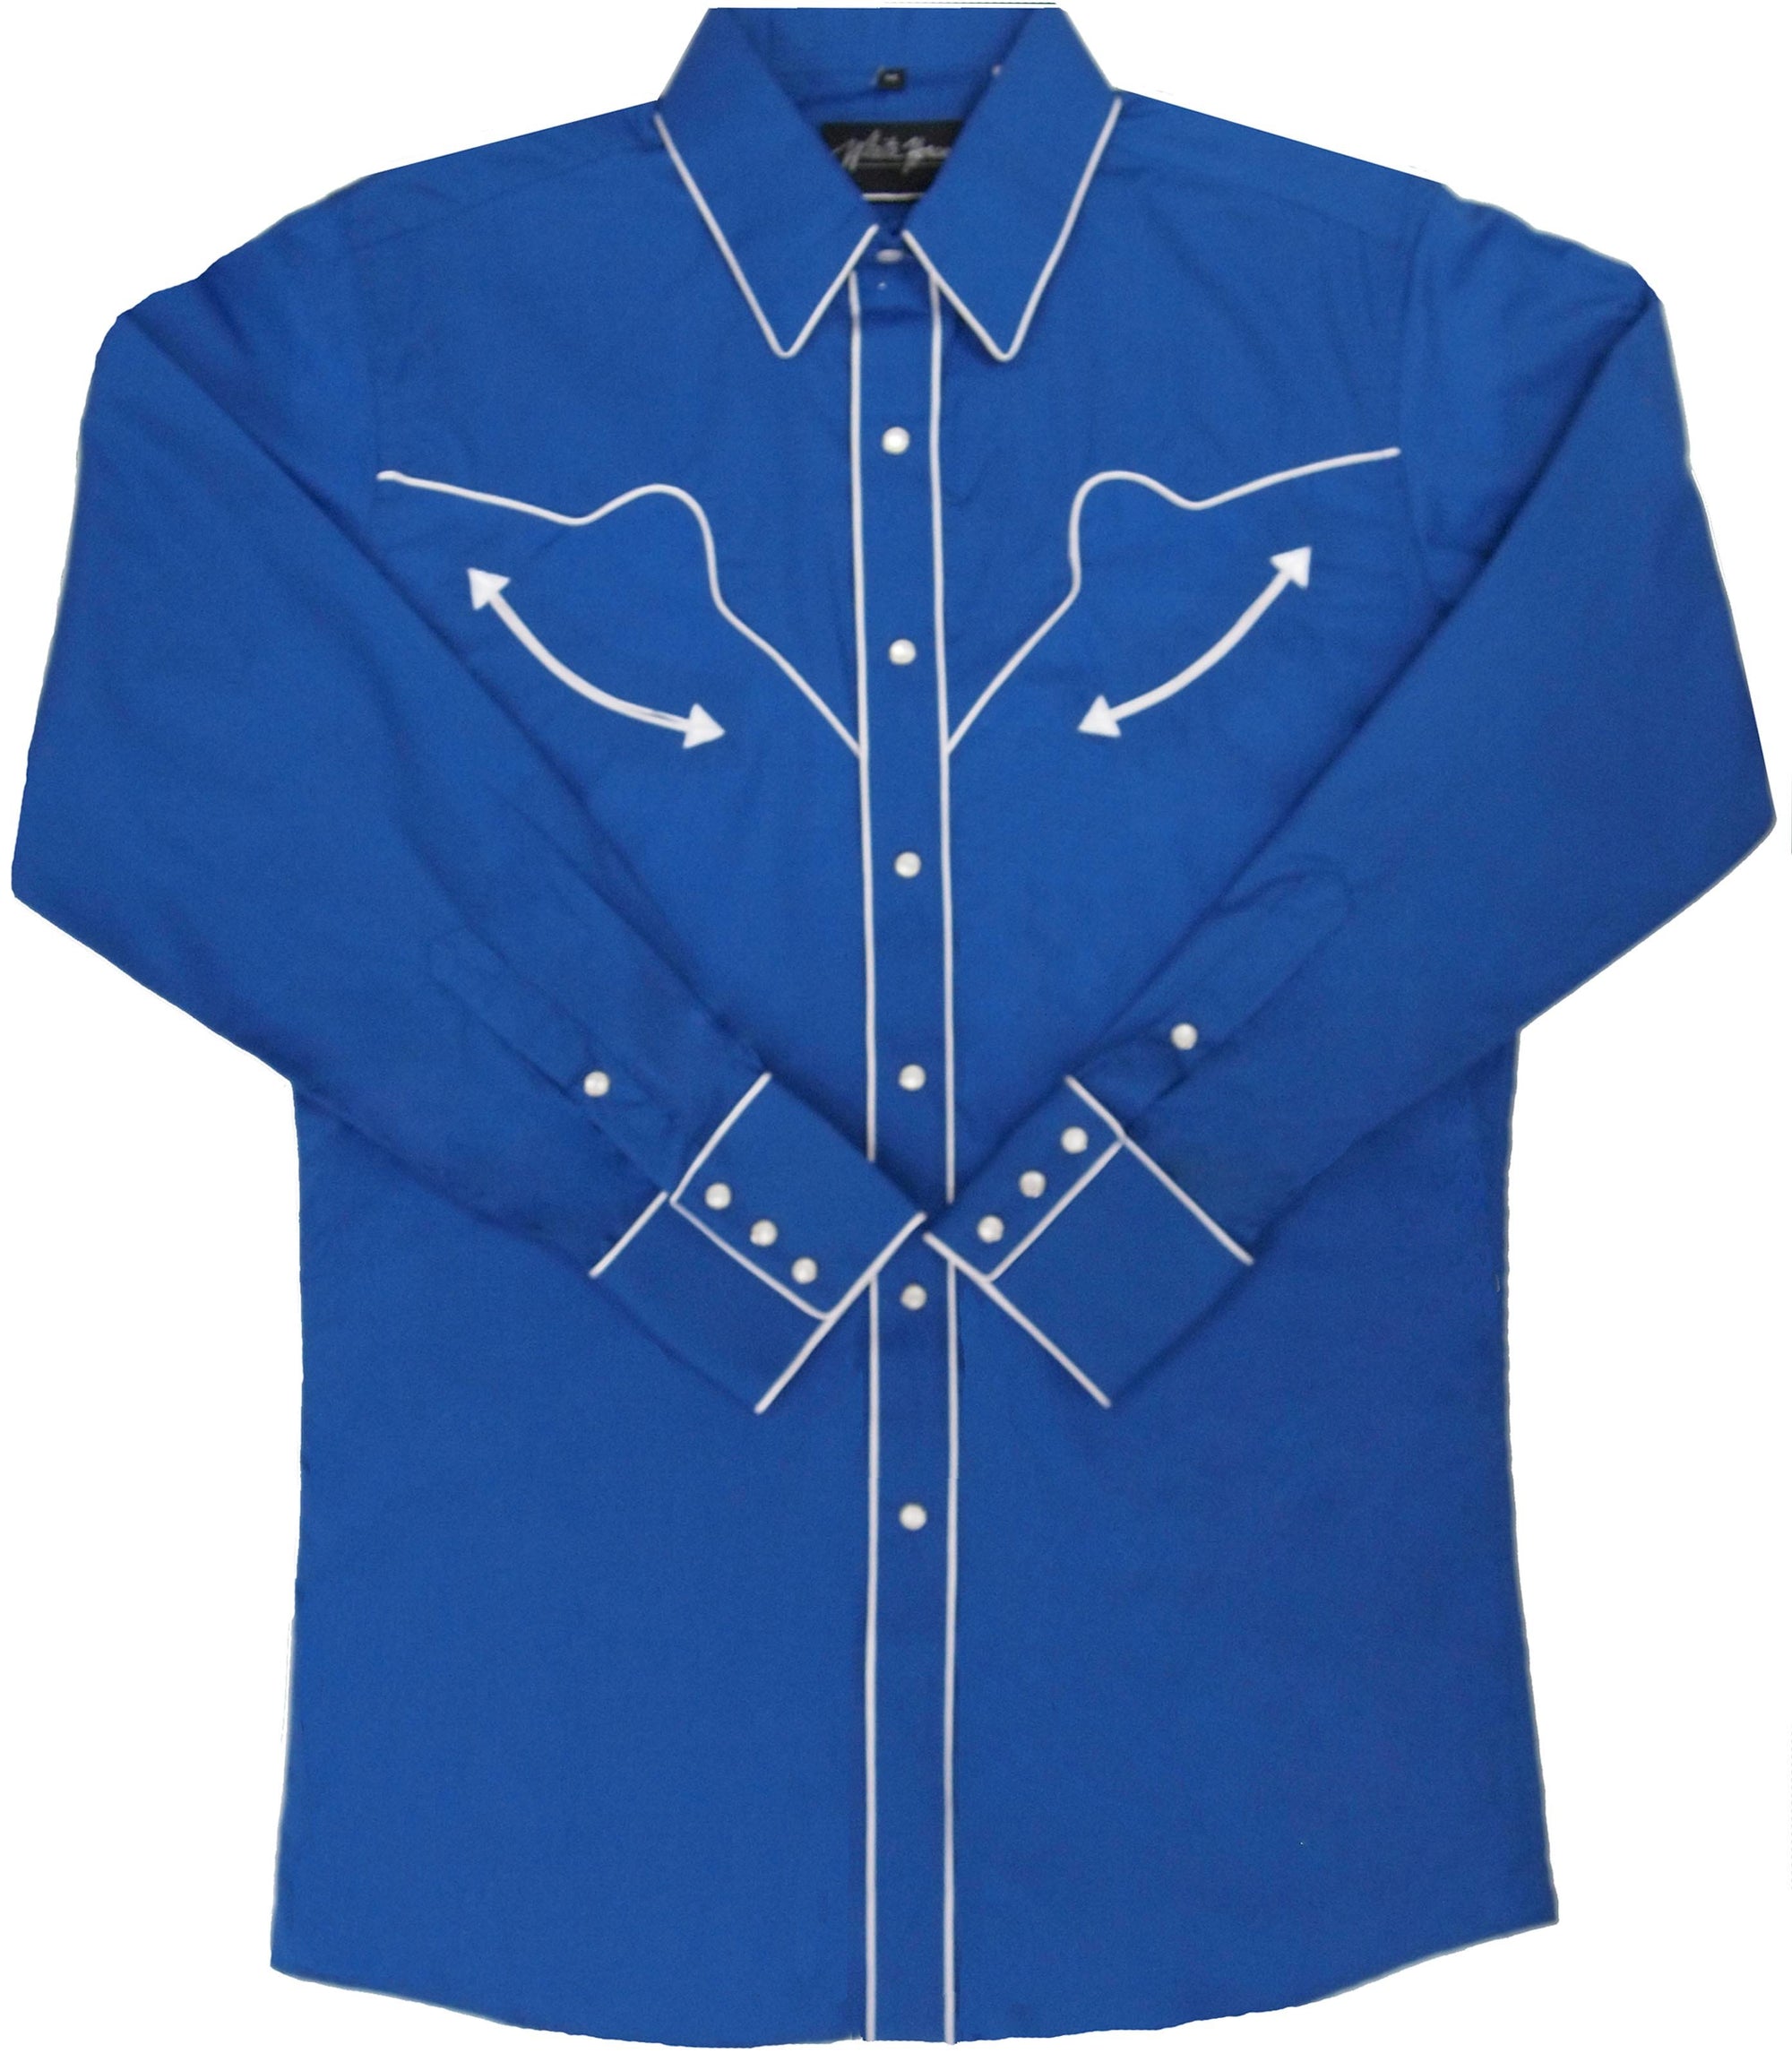 White Horse Apparel Men's Western Shirt Royal with White Piping Front